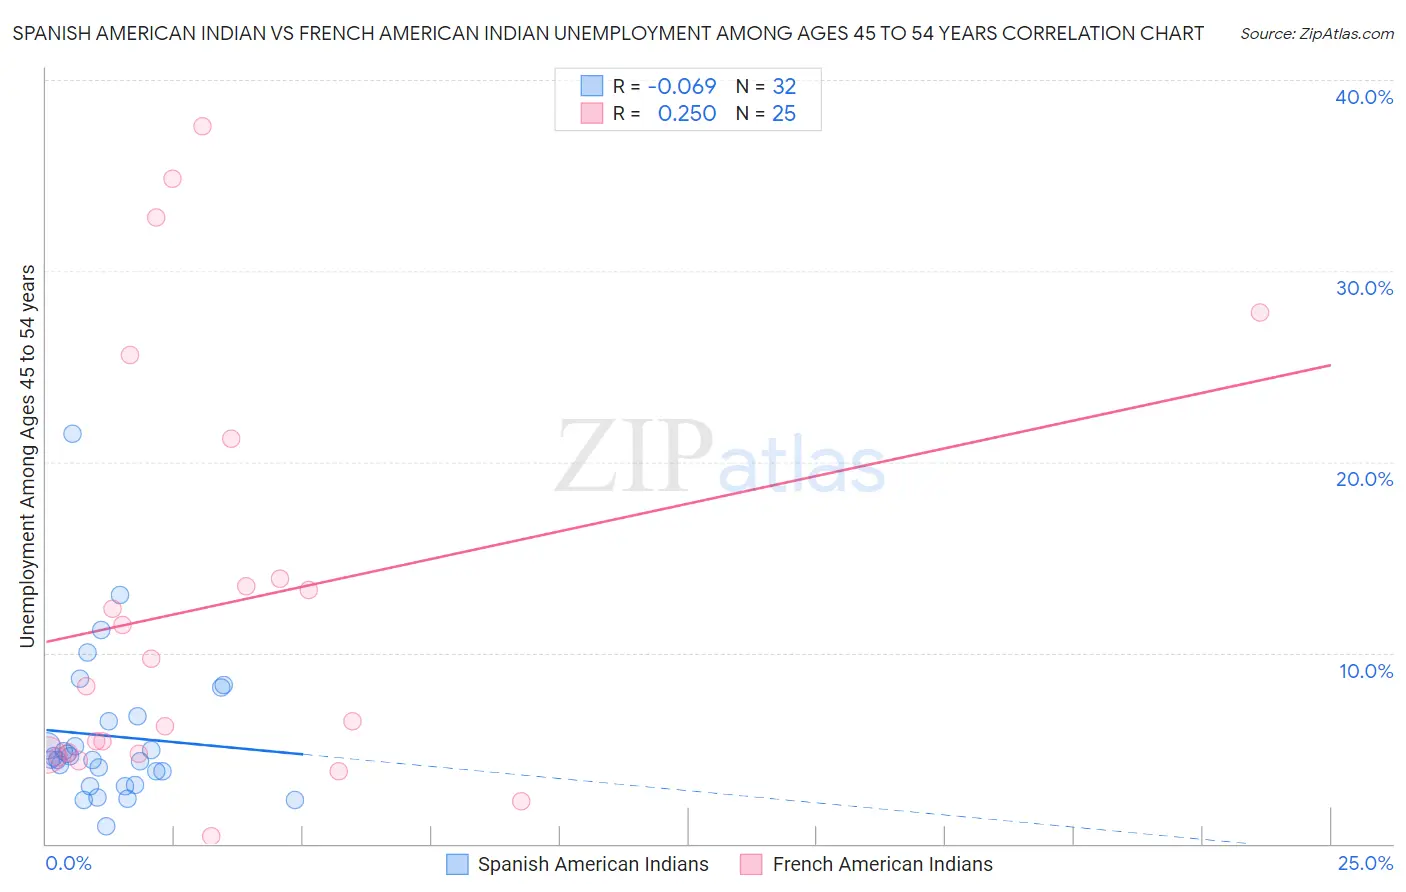 Spanish American Indian vs French American Indian Unemployment Among Ages 45 to 54 years